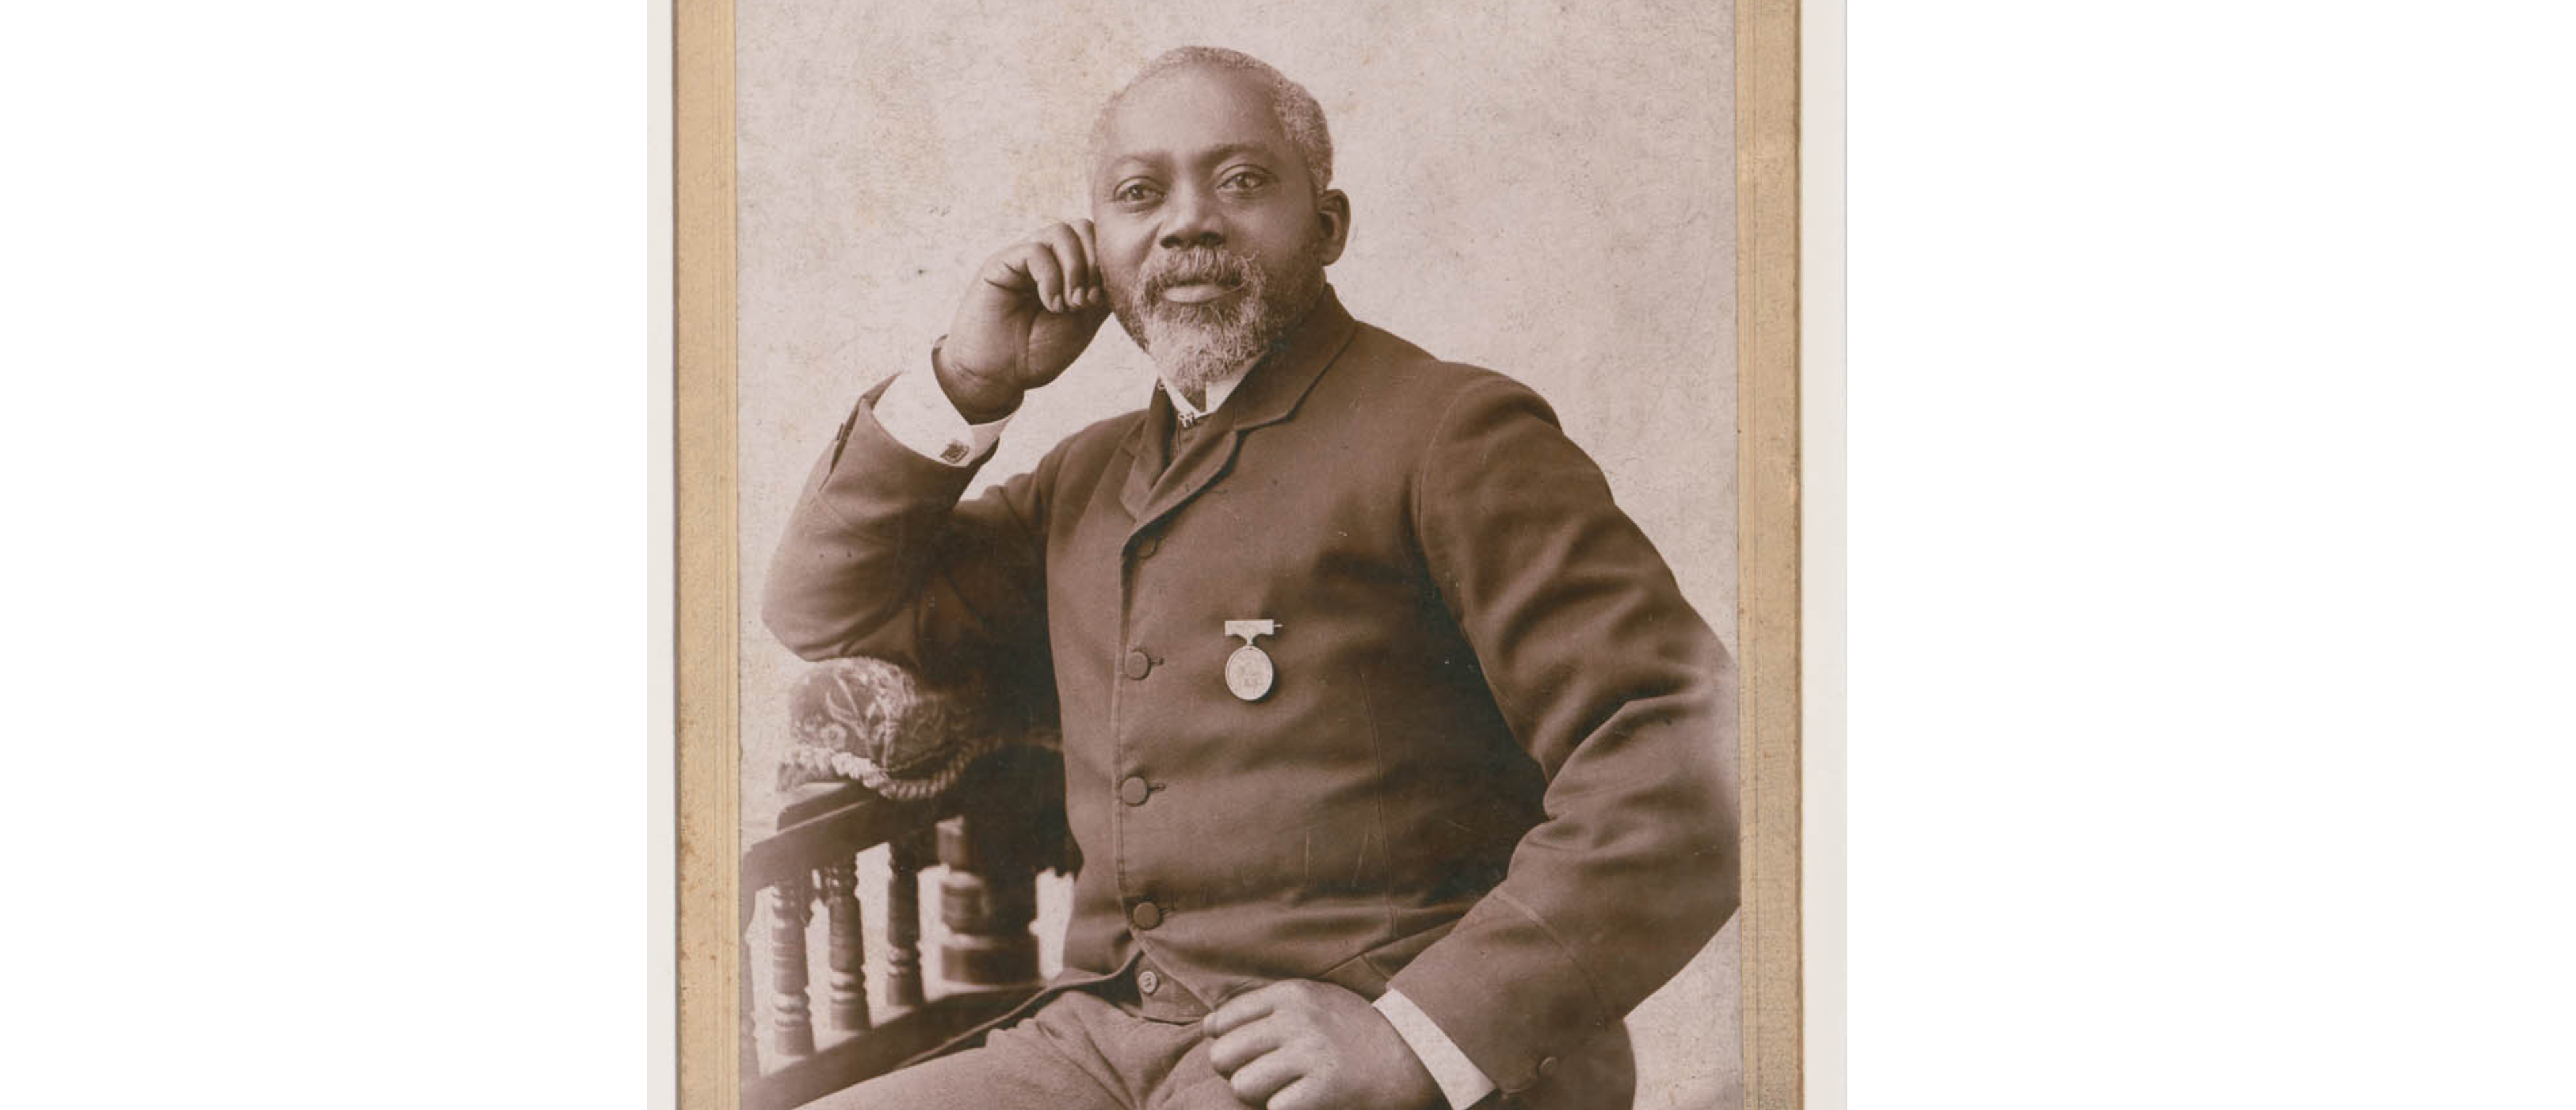 An older Black man, balding with a white beard. He wears a medal on his dress coat. He poses seated, with one hand aside his cheek and the other on his thigh. He looks past the camera. 